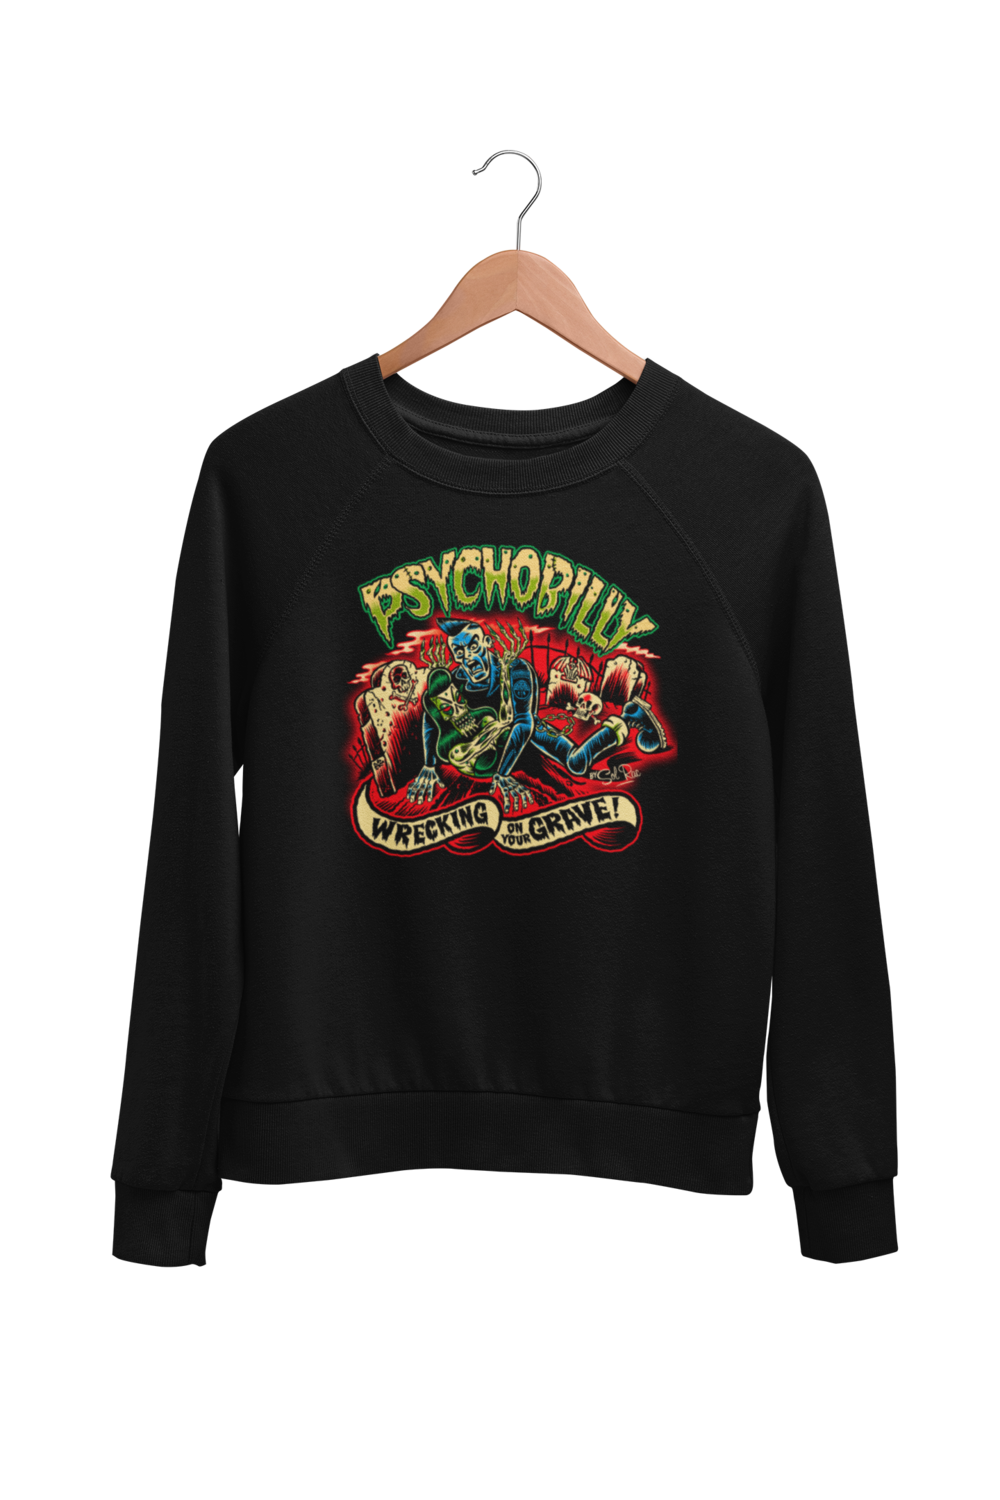 PSYCHOBILLY WRECKING ON YOUR GRAVE SWEATSHIRT UNISEX by BY SOL RAC